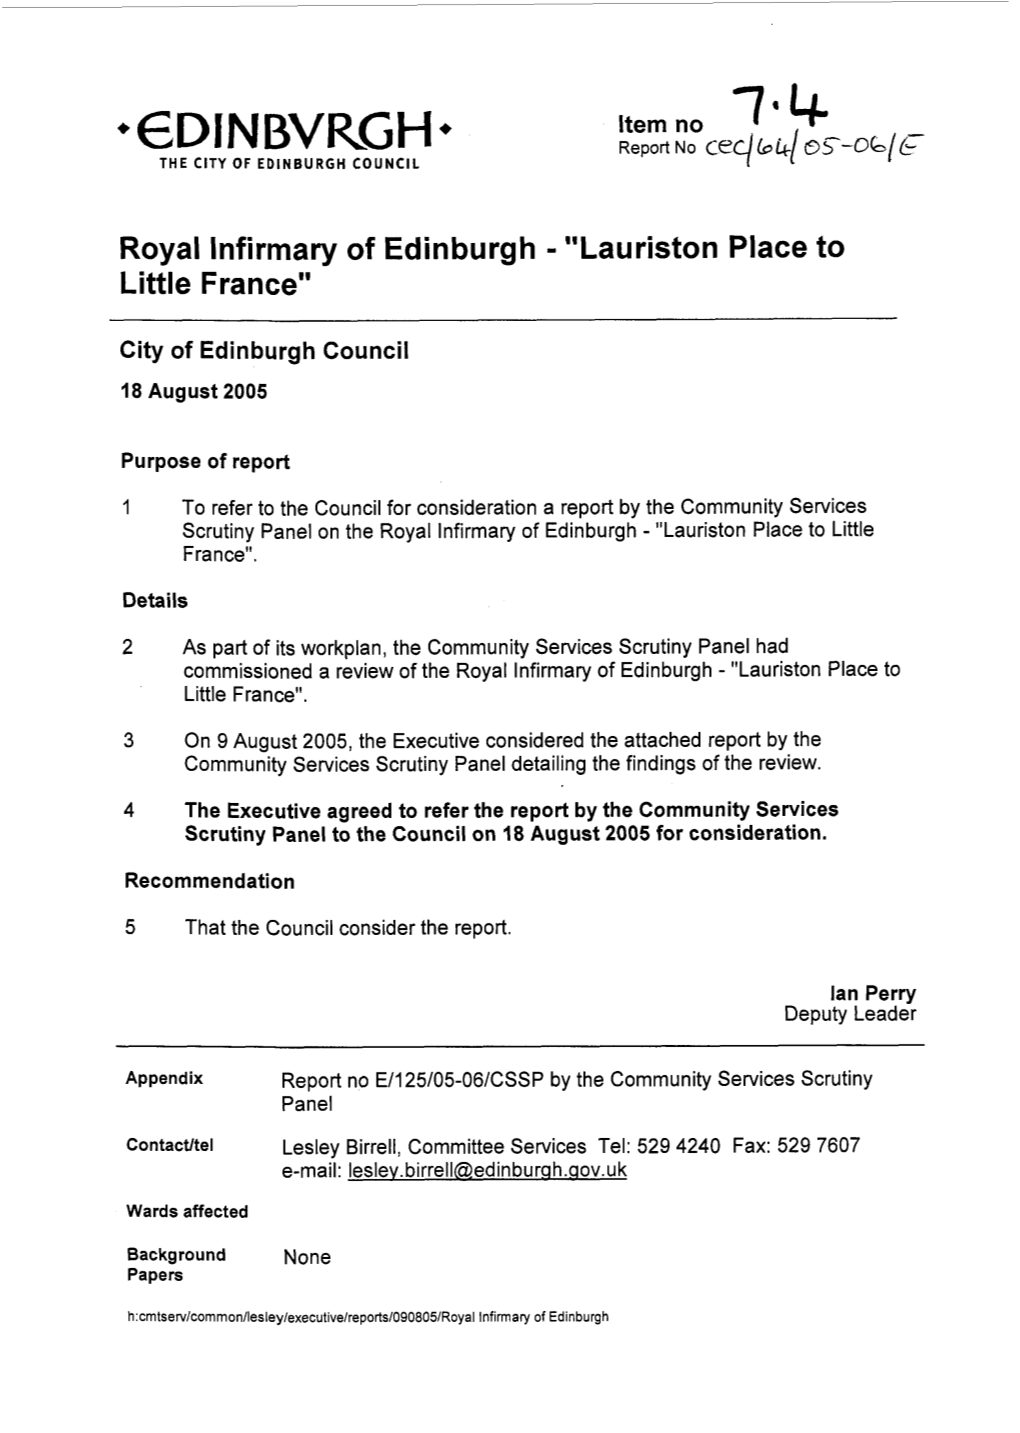 Royal Infirmary of Edinburgh - "Lauriston Place to Little France"